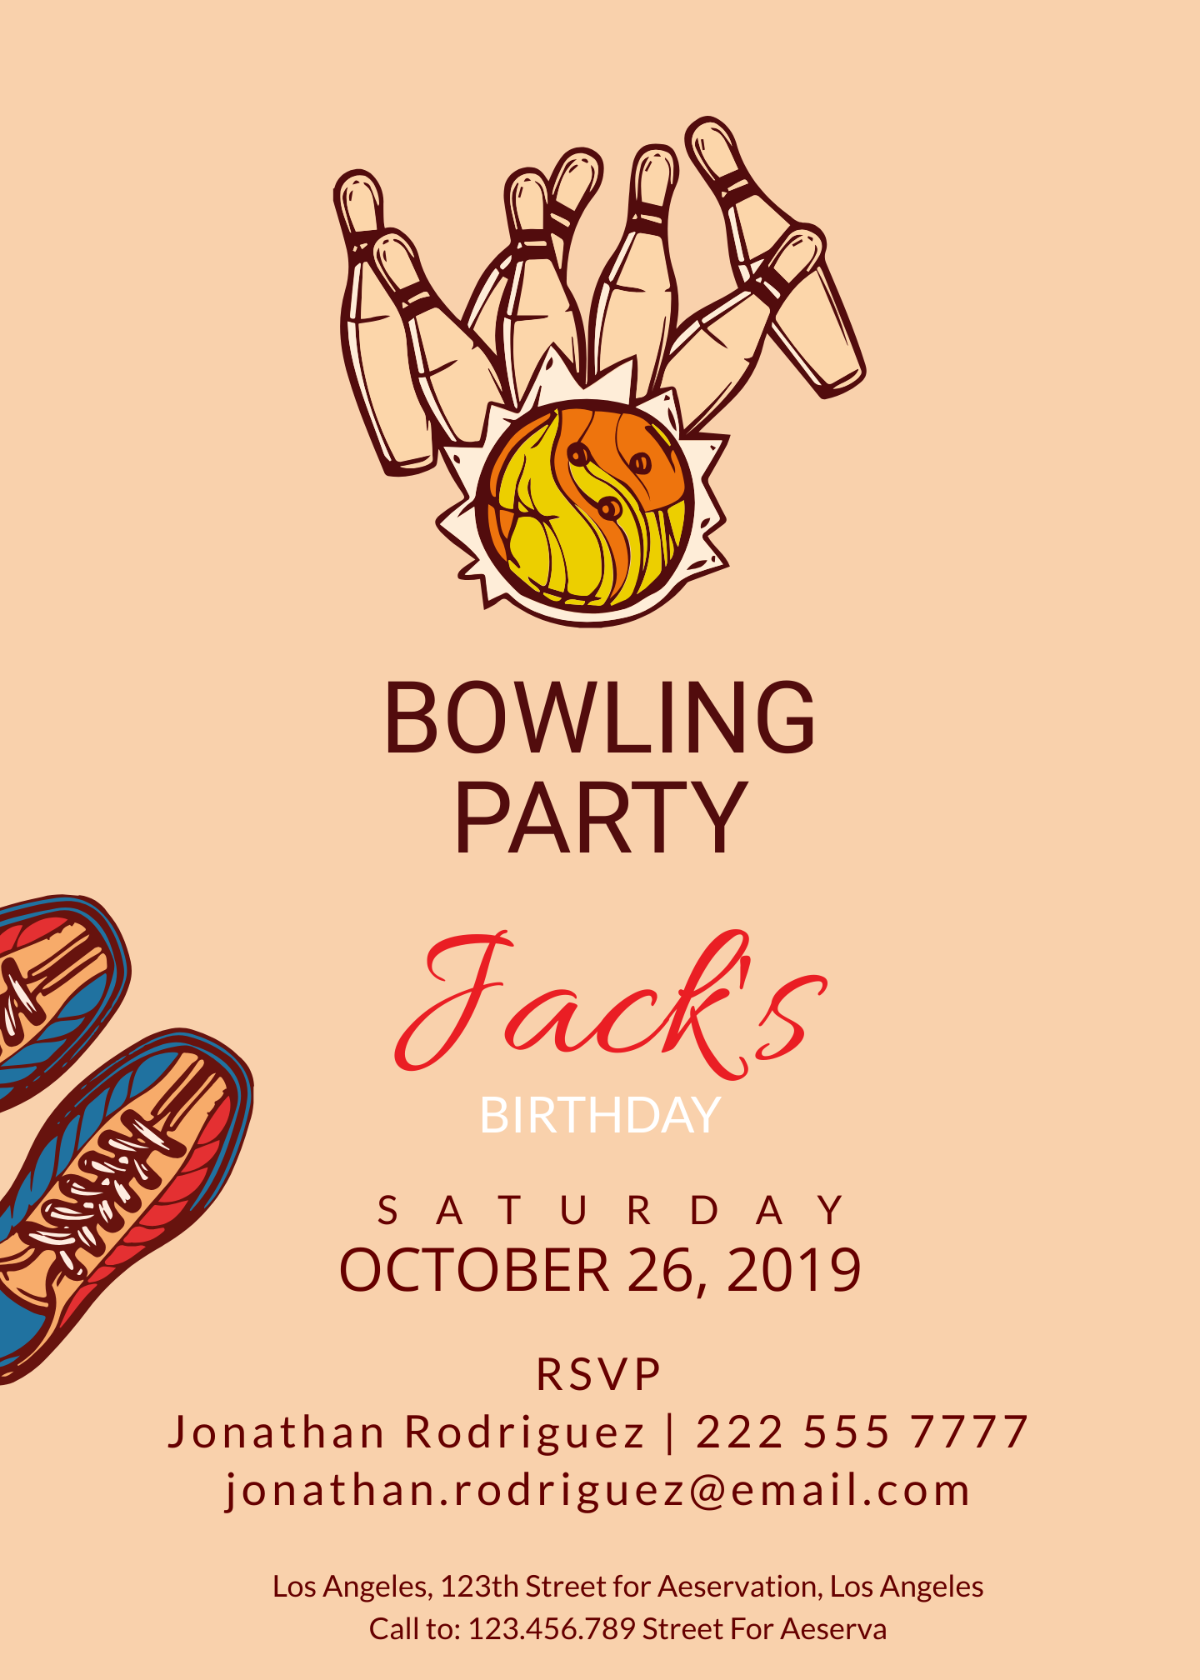 Bowling Invitation Party